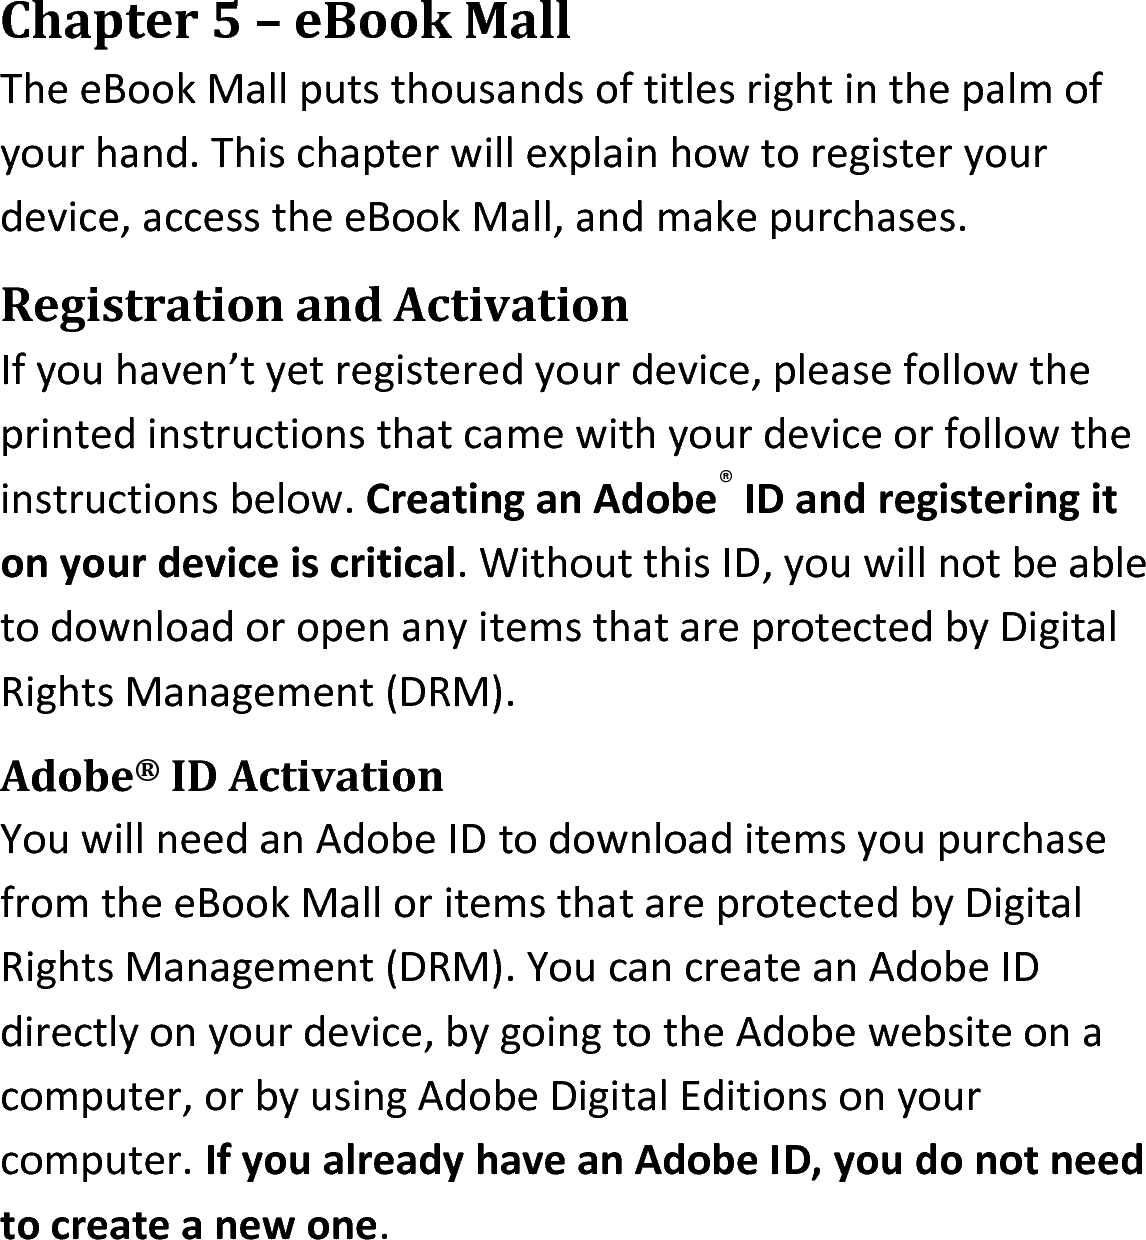 Chapter 5 – eBook MallThe eBook Mall puts thousands of titles right in the palm of your hand. This chapter will explain how to register your device, access the eBook Mall, and make purchases.Registration and ActivationIf you haven’t yet registered your device, please follow the printed instructions that came with your device or follow the instructions below. Creating an Adobe® ID and registering it on your device is critical. Without this ID, you will not be able to download or open any items that are protected by Digital Rights Management (DRM).Adobe® ID ActivationYou will need an Adobe ID to download items you purchase from the eBook Mall or items that are protected by Digital Rights Management (DRM). You can create an Adobe ID directly on your device, by going to the Adobe website on a computer, or by using Adobe Digital Editions on your computer. If you already have an Adobe ID, you do not need to create a new one.